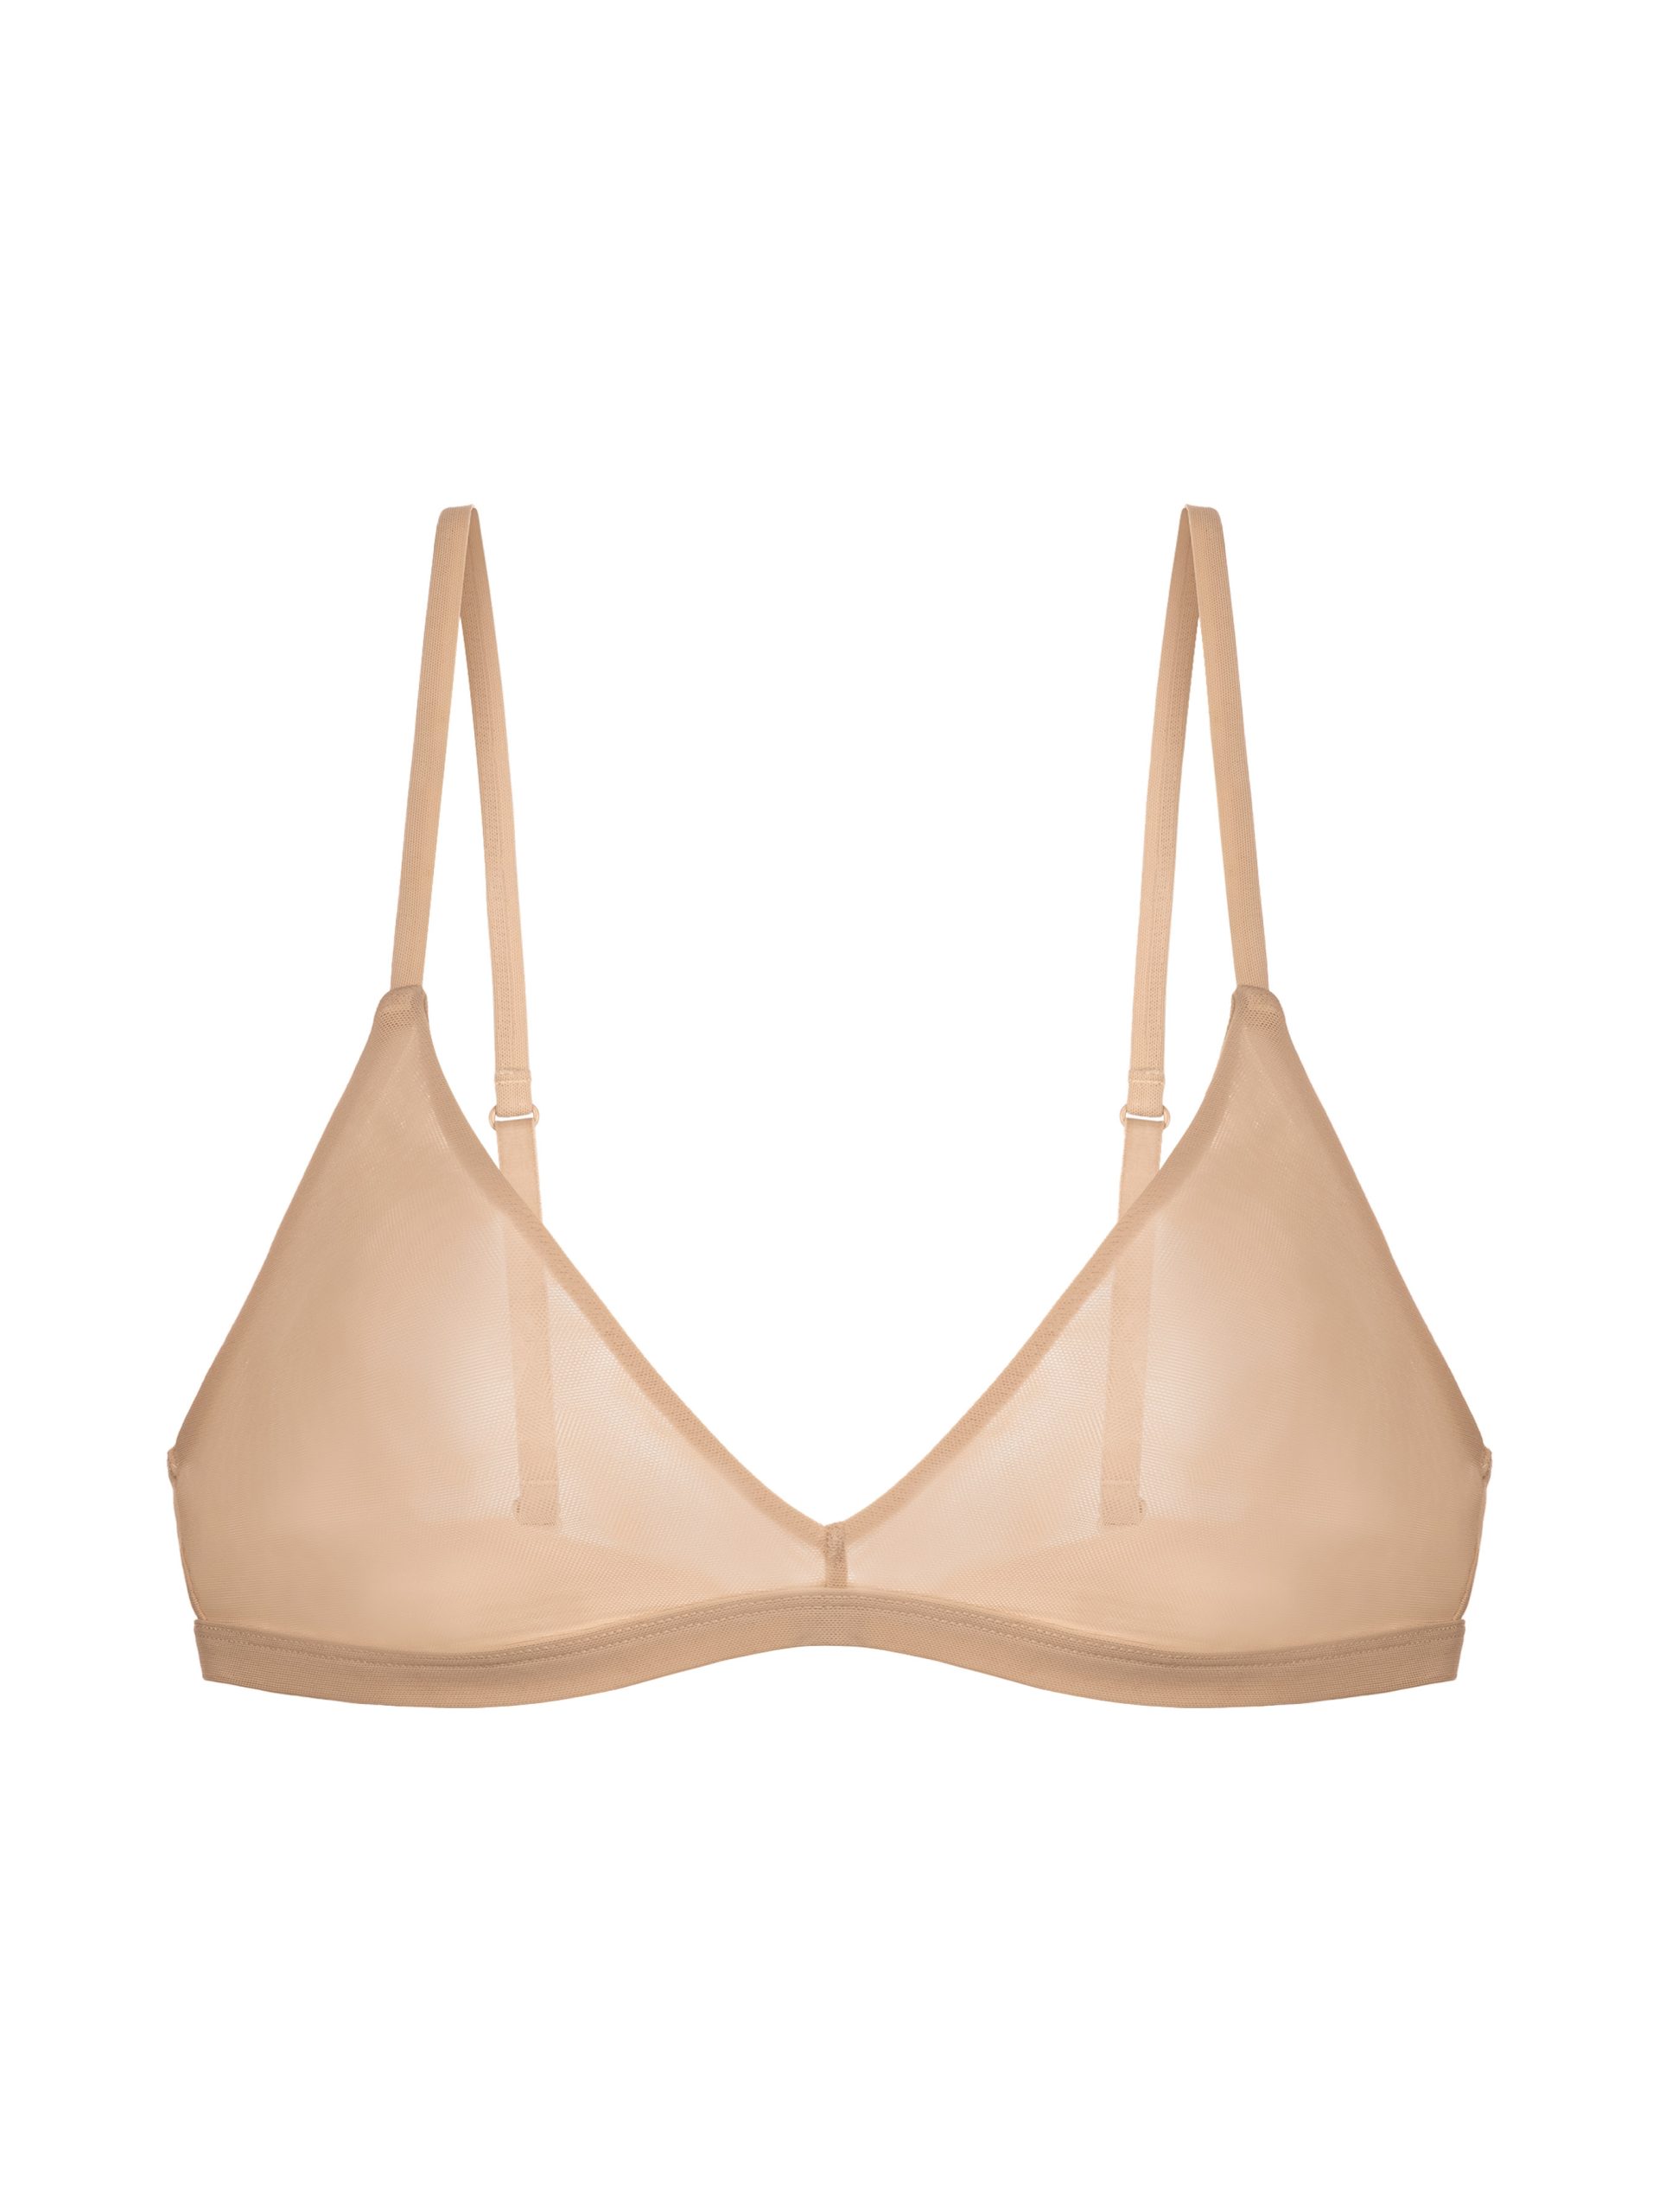 Lingadore Basic Collection Invisible Padded Soft Bra - Belle Lingerie   Lingadore Basic Collection Invisible Padded Soft Bra - Belle Lingerie